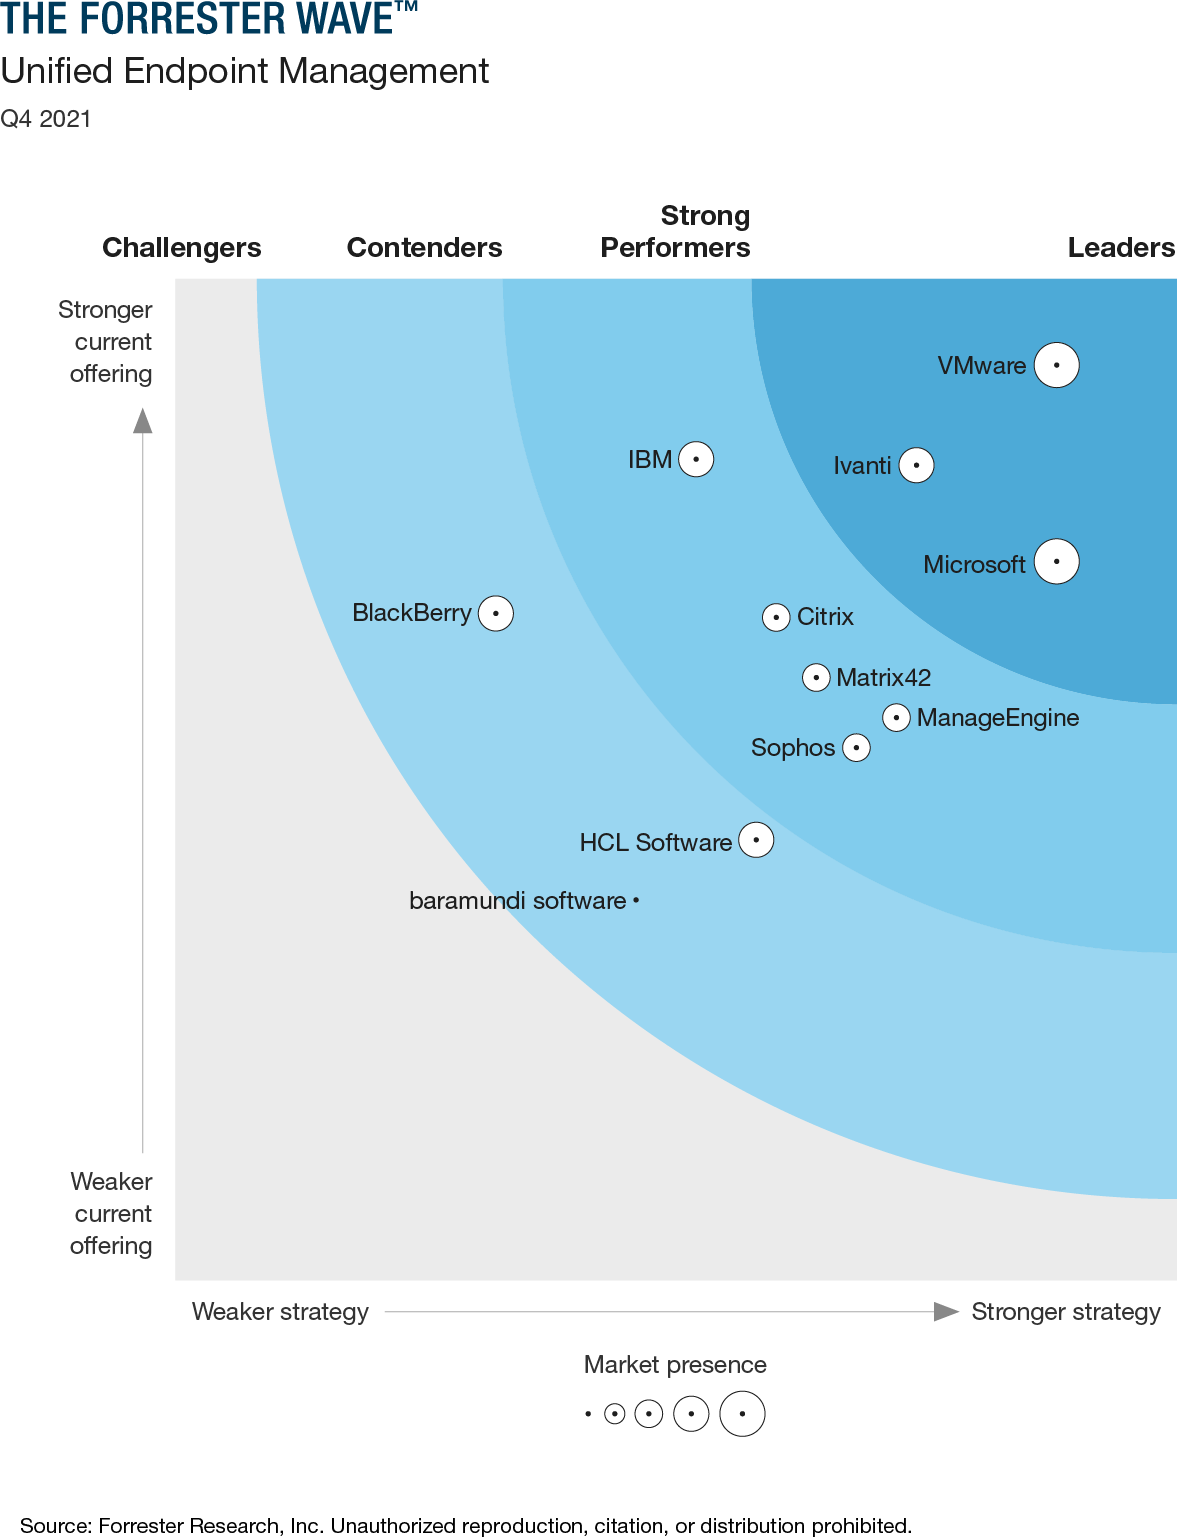 The Forrester Wave™: Unified Endpoint Management, Q4 2021